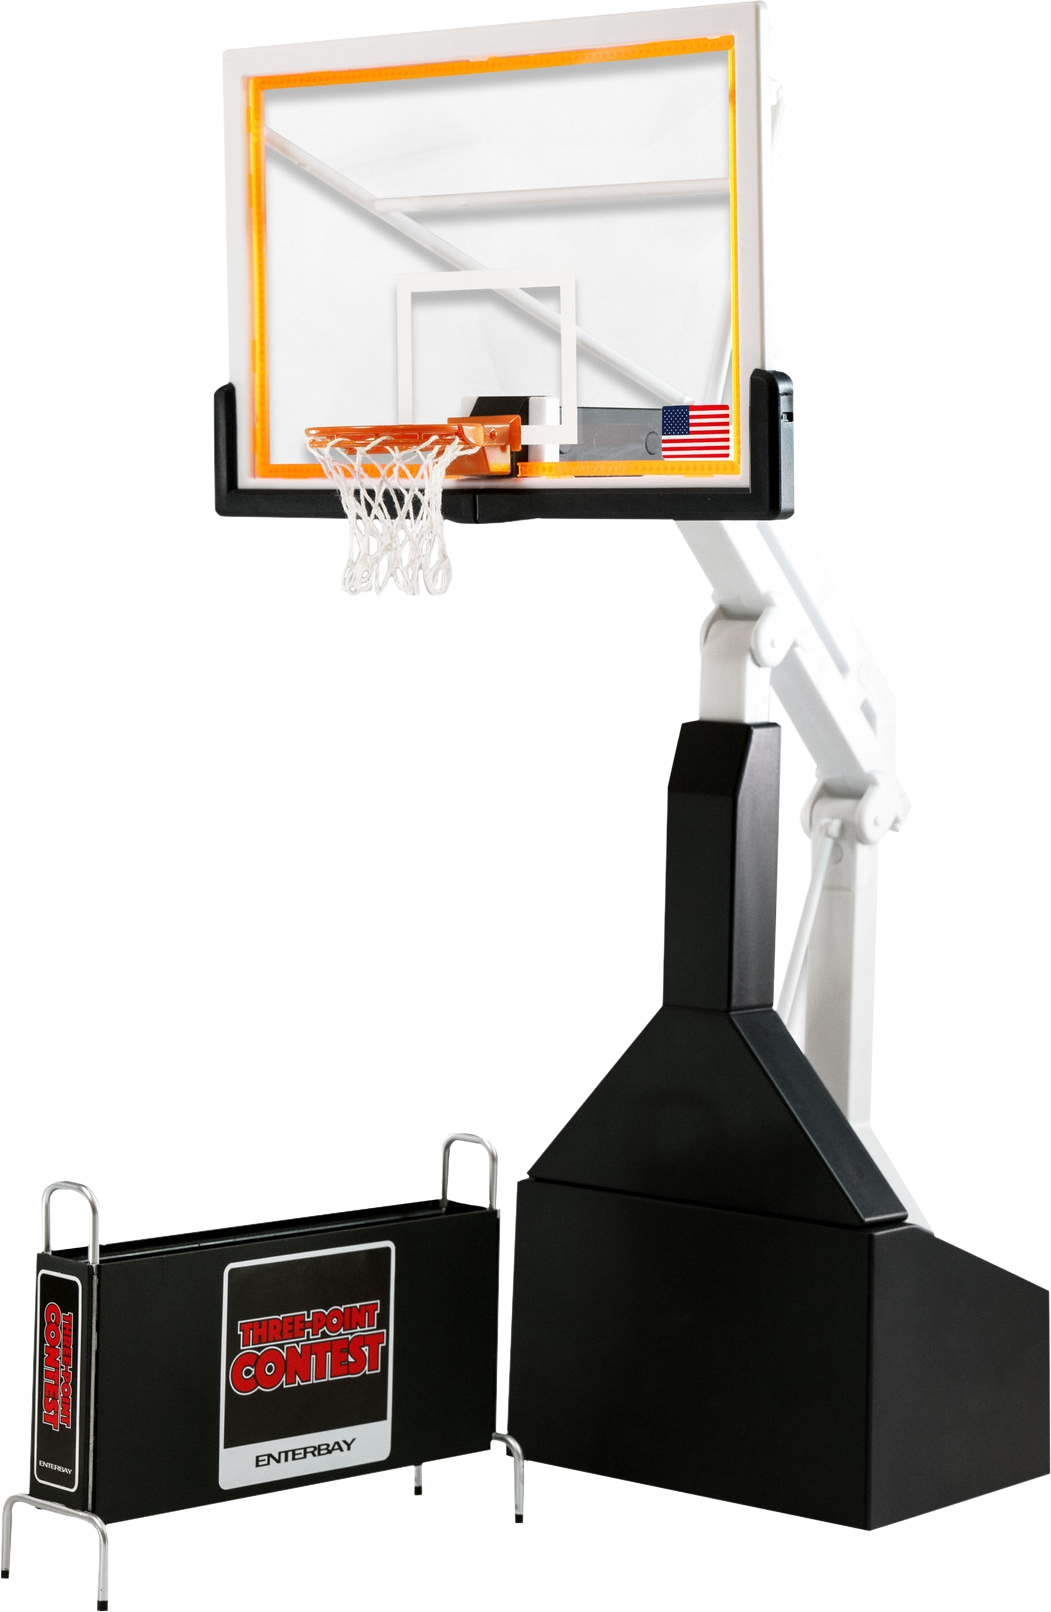 A Toy Basketball Hoop And A Black Stand